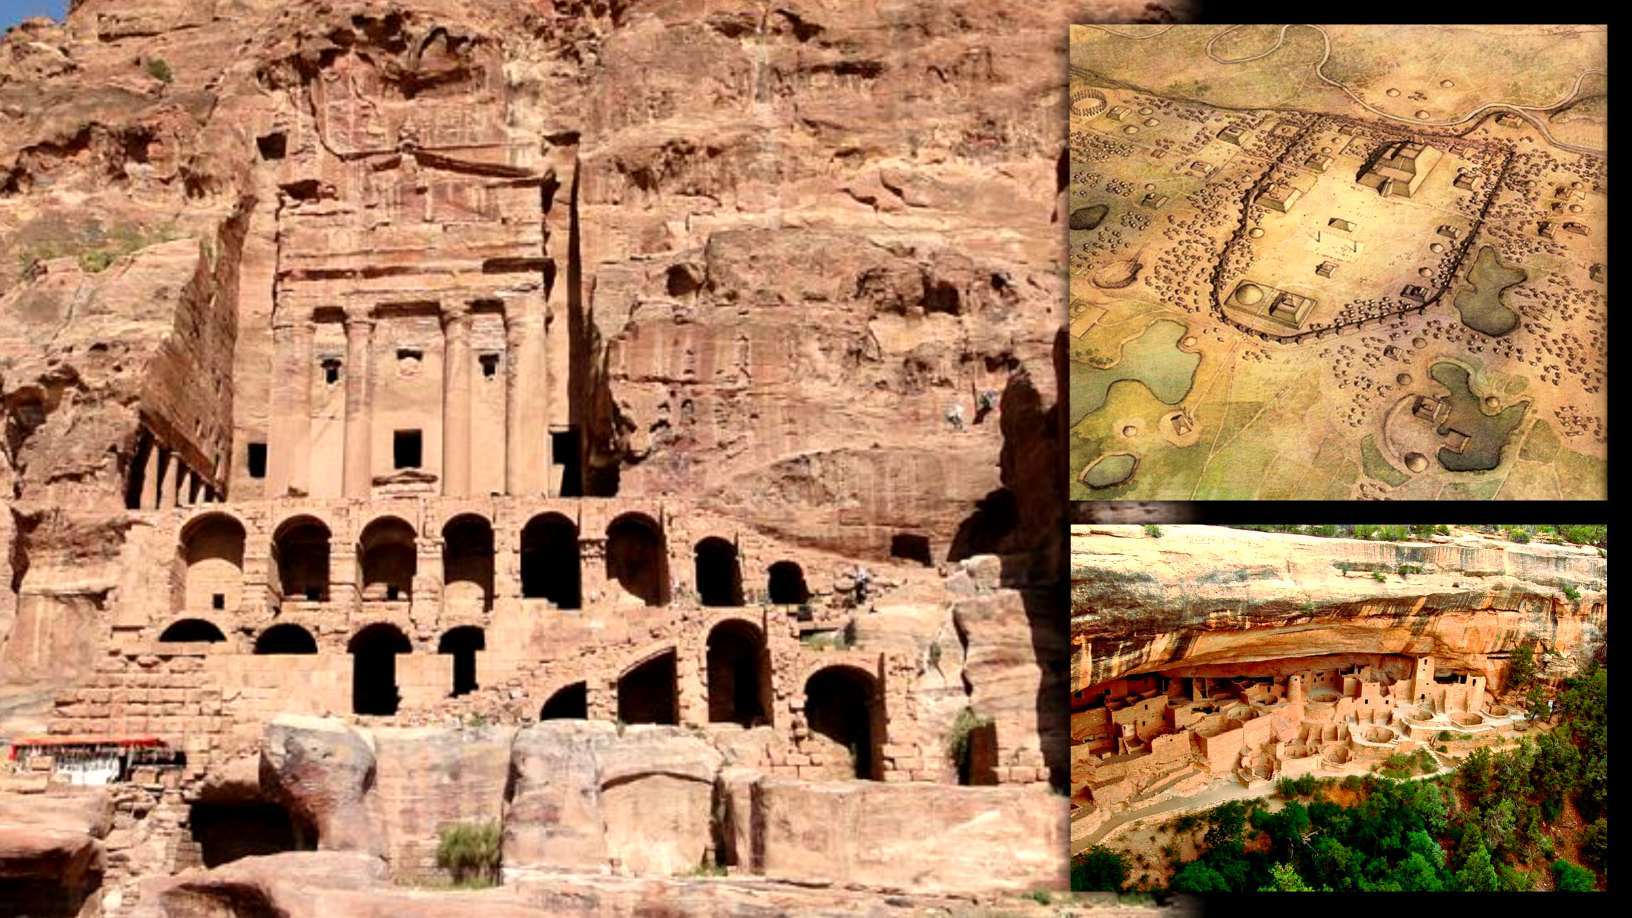 16 ancient cities and settlements that were mysteriously abandoned 2